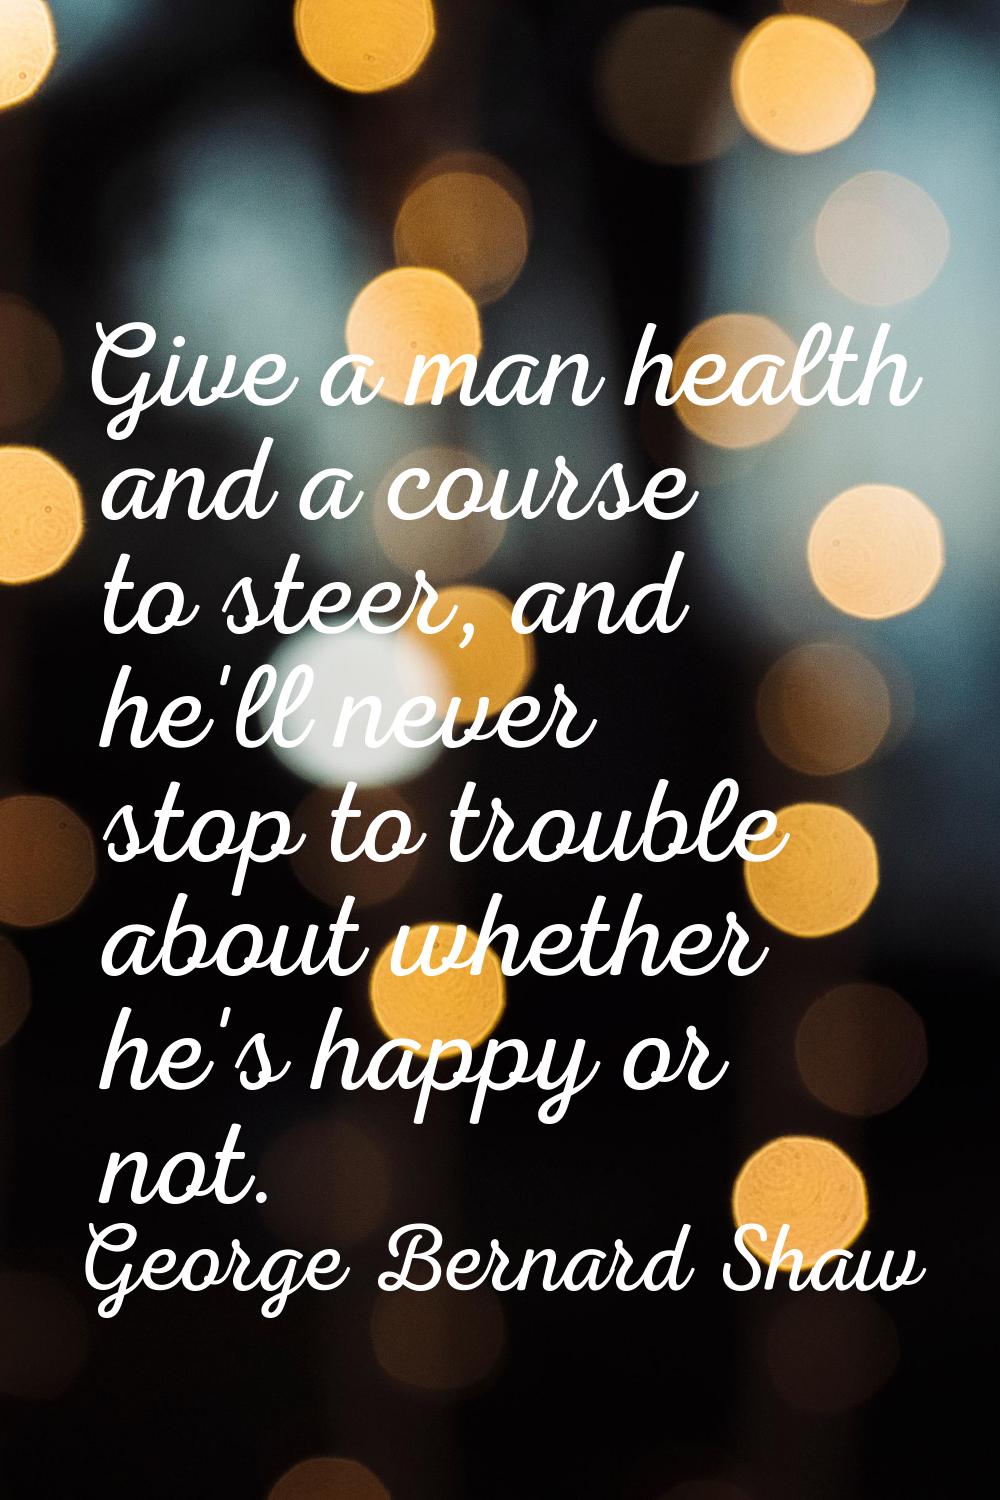 Give a man health and a course to steer, and he'll never stop to trouble about whether he's happy o